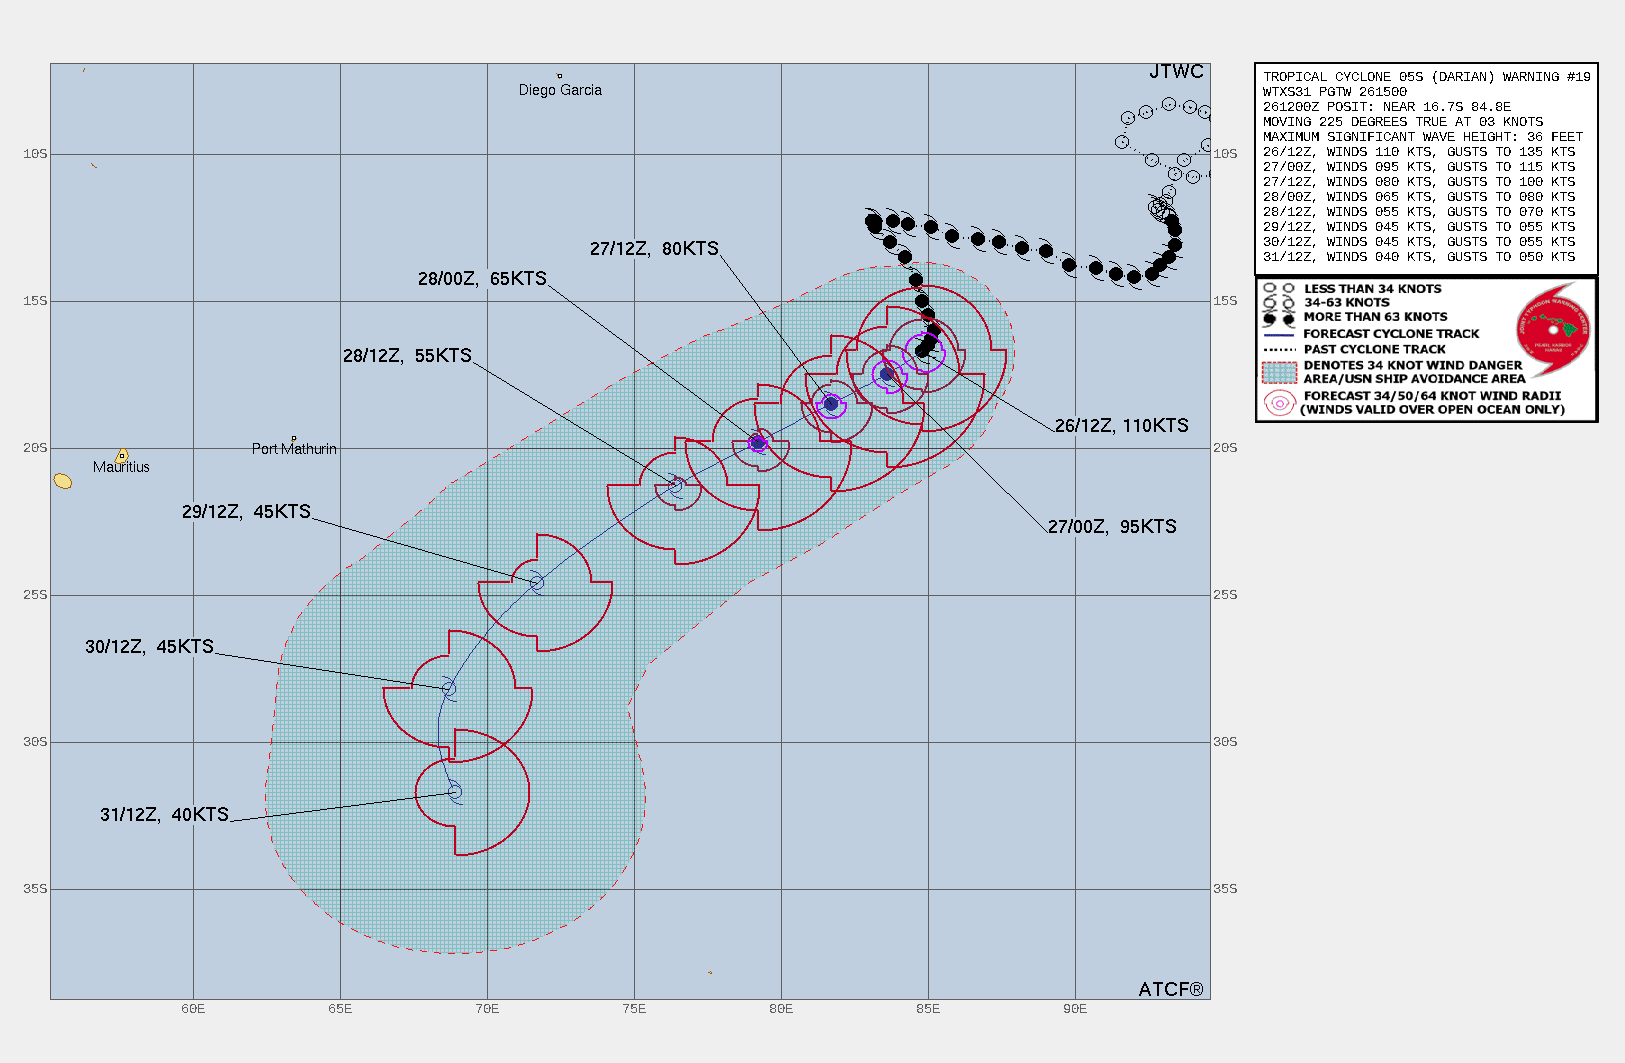 FORECAST REASONING.  SIGNIFICANT FORECAST CHANGES: THERE ARE NO SIGNIFICANT CHANGES TO THE FORECAST FROM THE PREVIOUS WARNING.  FORECAST DISCUSSION: TC 05S WILL ACCELERATE SOUTHWESTWARD IN THE NEAR TO MEDIUM TERM AS THE SUBTROPICAL STEERING RIDGE CONTINUES TO  BUILD TO THE SOUTHEAST. AFTER TAU 72, THE SYSTEM WILL GRADUALLY TURN POLEWARD AS IT REACHES AND ROUNDS THE WESTERN PERIPHERY OF THE STEERING RIDGE AXIS. THE UPPER-LEVEL PATTERN IS EXPECTED TO REMAIN GENERALLY FAVORABLE THROUGH TAU 72, WITH LOW TO MODERATE VERTICAL WIND SHEAR AND SUPPORTIVE OUTFLOW. HOWEVER, THE SYSTEM WILL WEAKEN AS IT TRACKS ACROSS PROGRESSIVELY COOLER WATER. TC 05S IS  EXPECTED TO CROSS THE 26C ISOTHERM WITHIN 24 HOURS. THE WEAKENING  TREND WILL MODERATE IN THE EXTENDED PERIOD AS THE SYSTEM ENCOUNTERS  AN UPPER-LEVEL TROUGH NEAR THE STEERING RIDGE AXIS, WHICH WILL  PROVIDE BAROCLINIC ENERGY AND SUPPORT TRANSITION TO A SUBTROPICAL  CYCLONE.